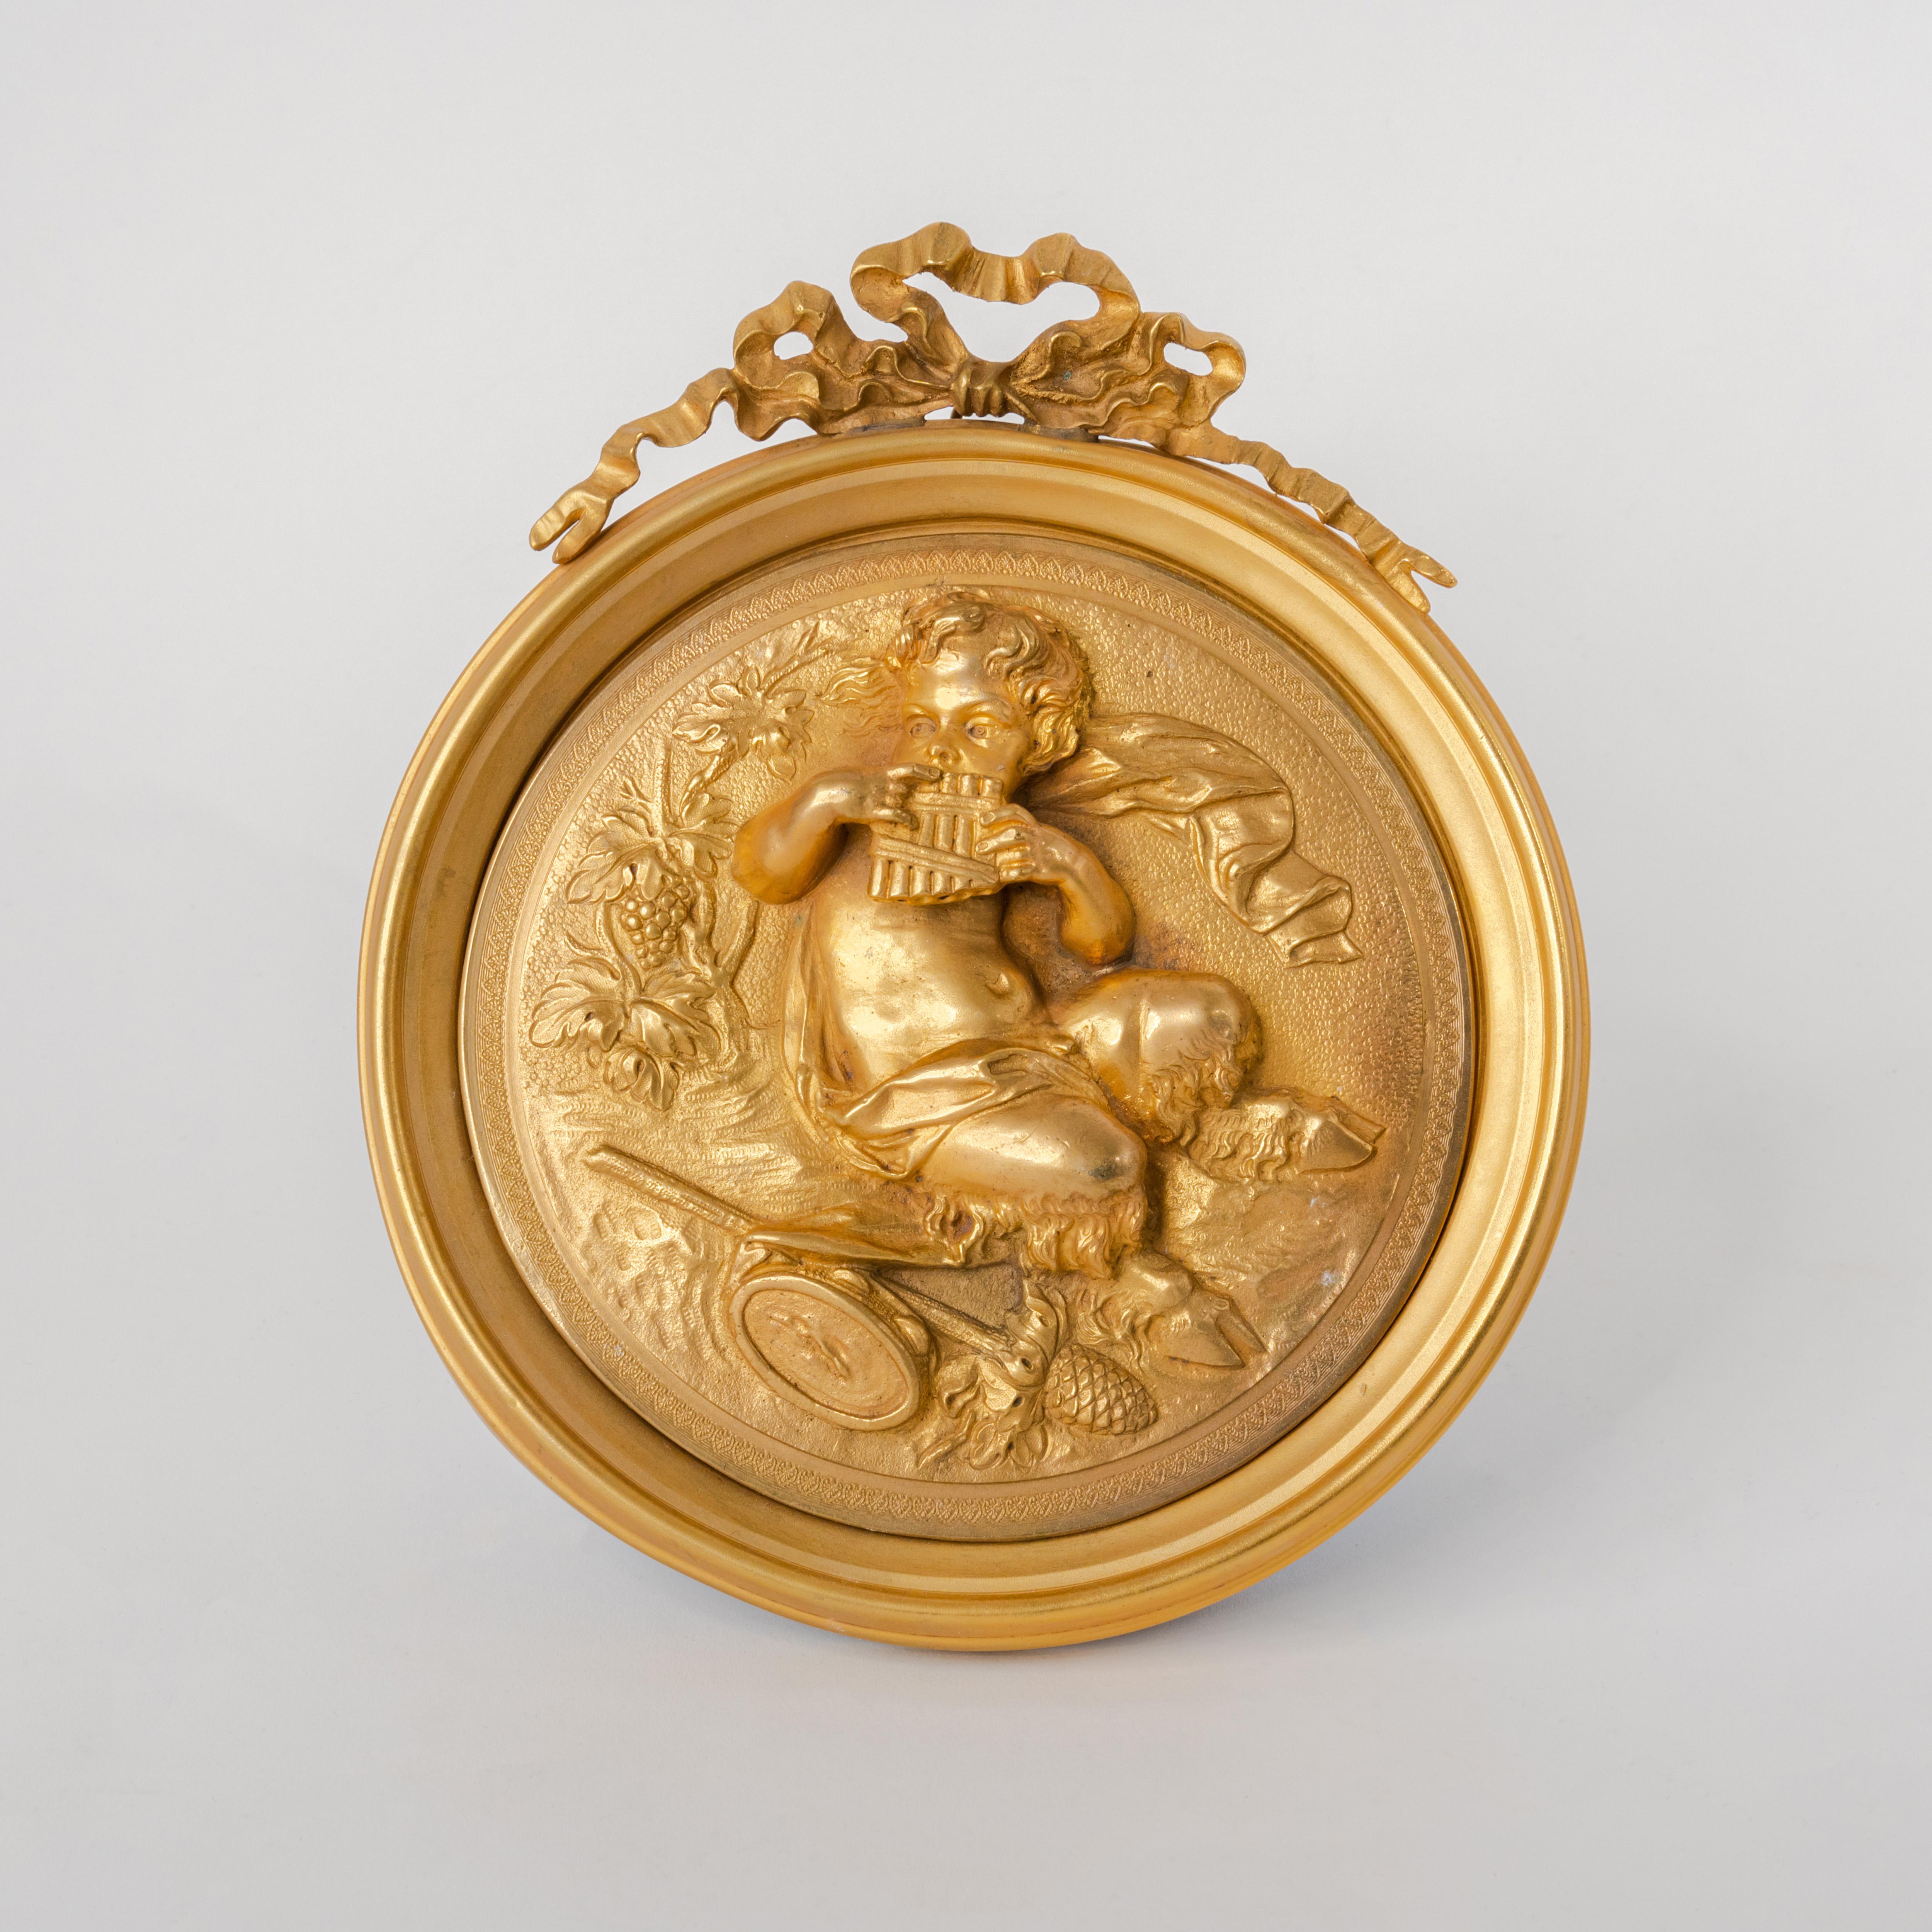 Pair of French gilt bronze round figural wall plaques, France, 19th century 
Attributed To F. Barbedienne

Measures: 10